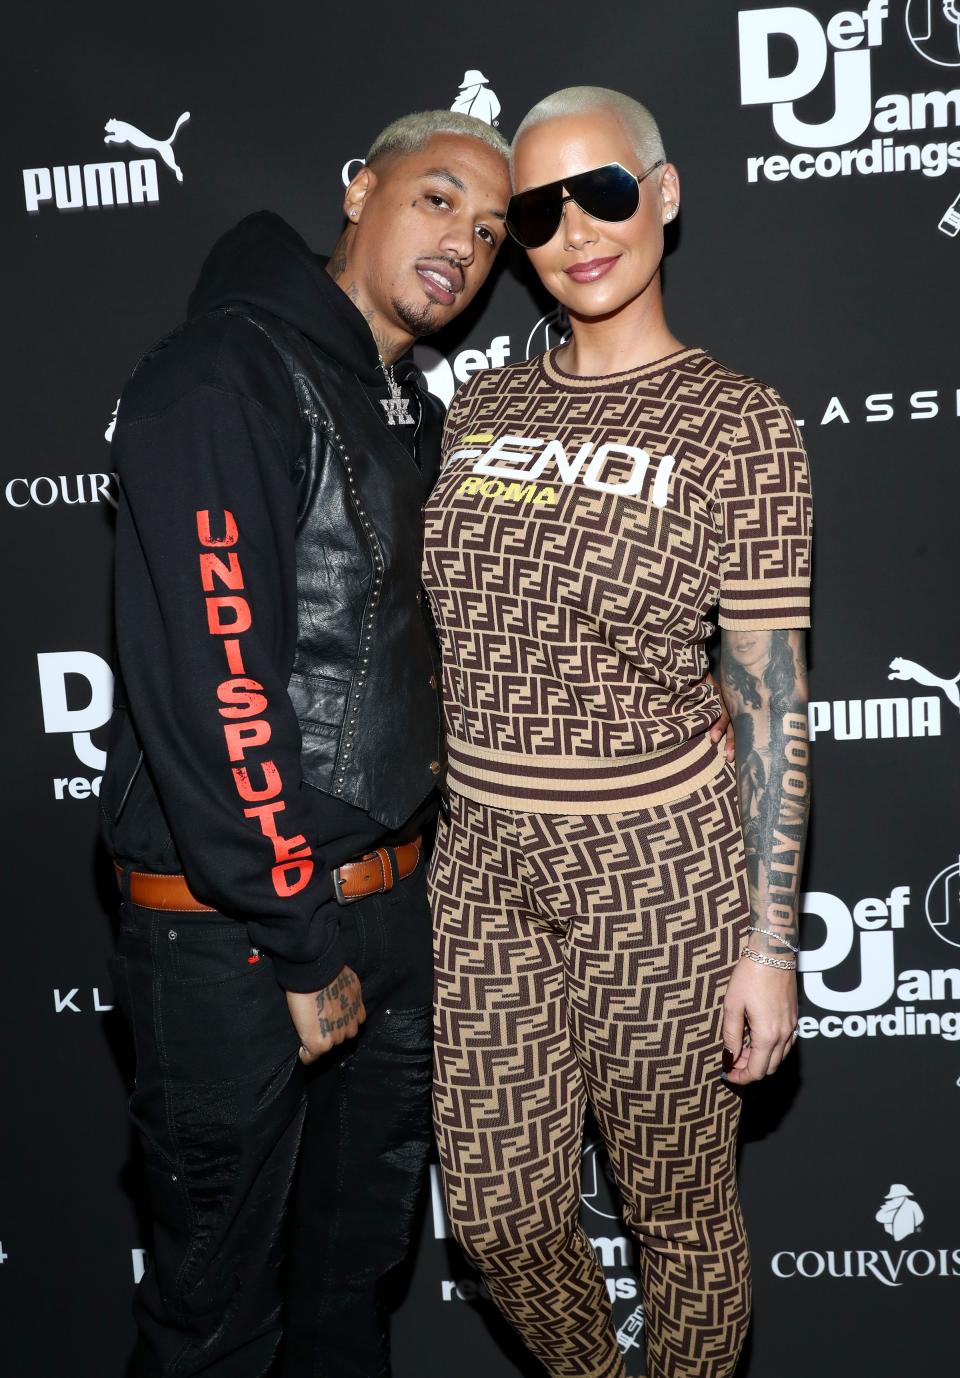 Alexander Edwards and Amber Rose attend the Def Jam Pre-Grammy 2019 party on February 08, 2019.